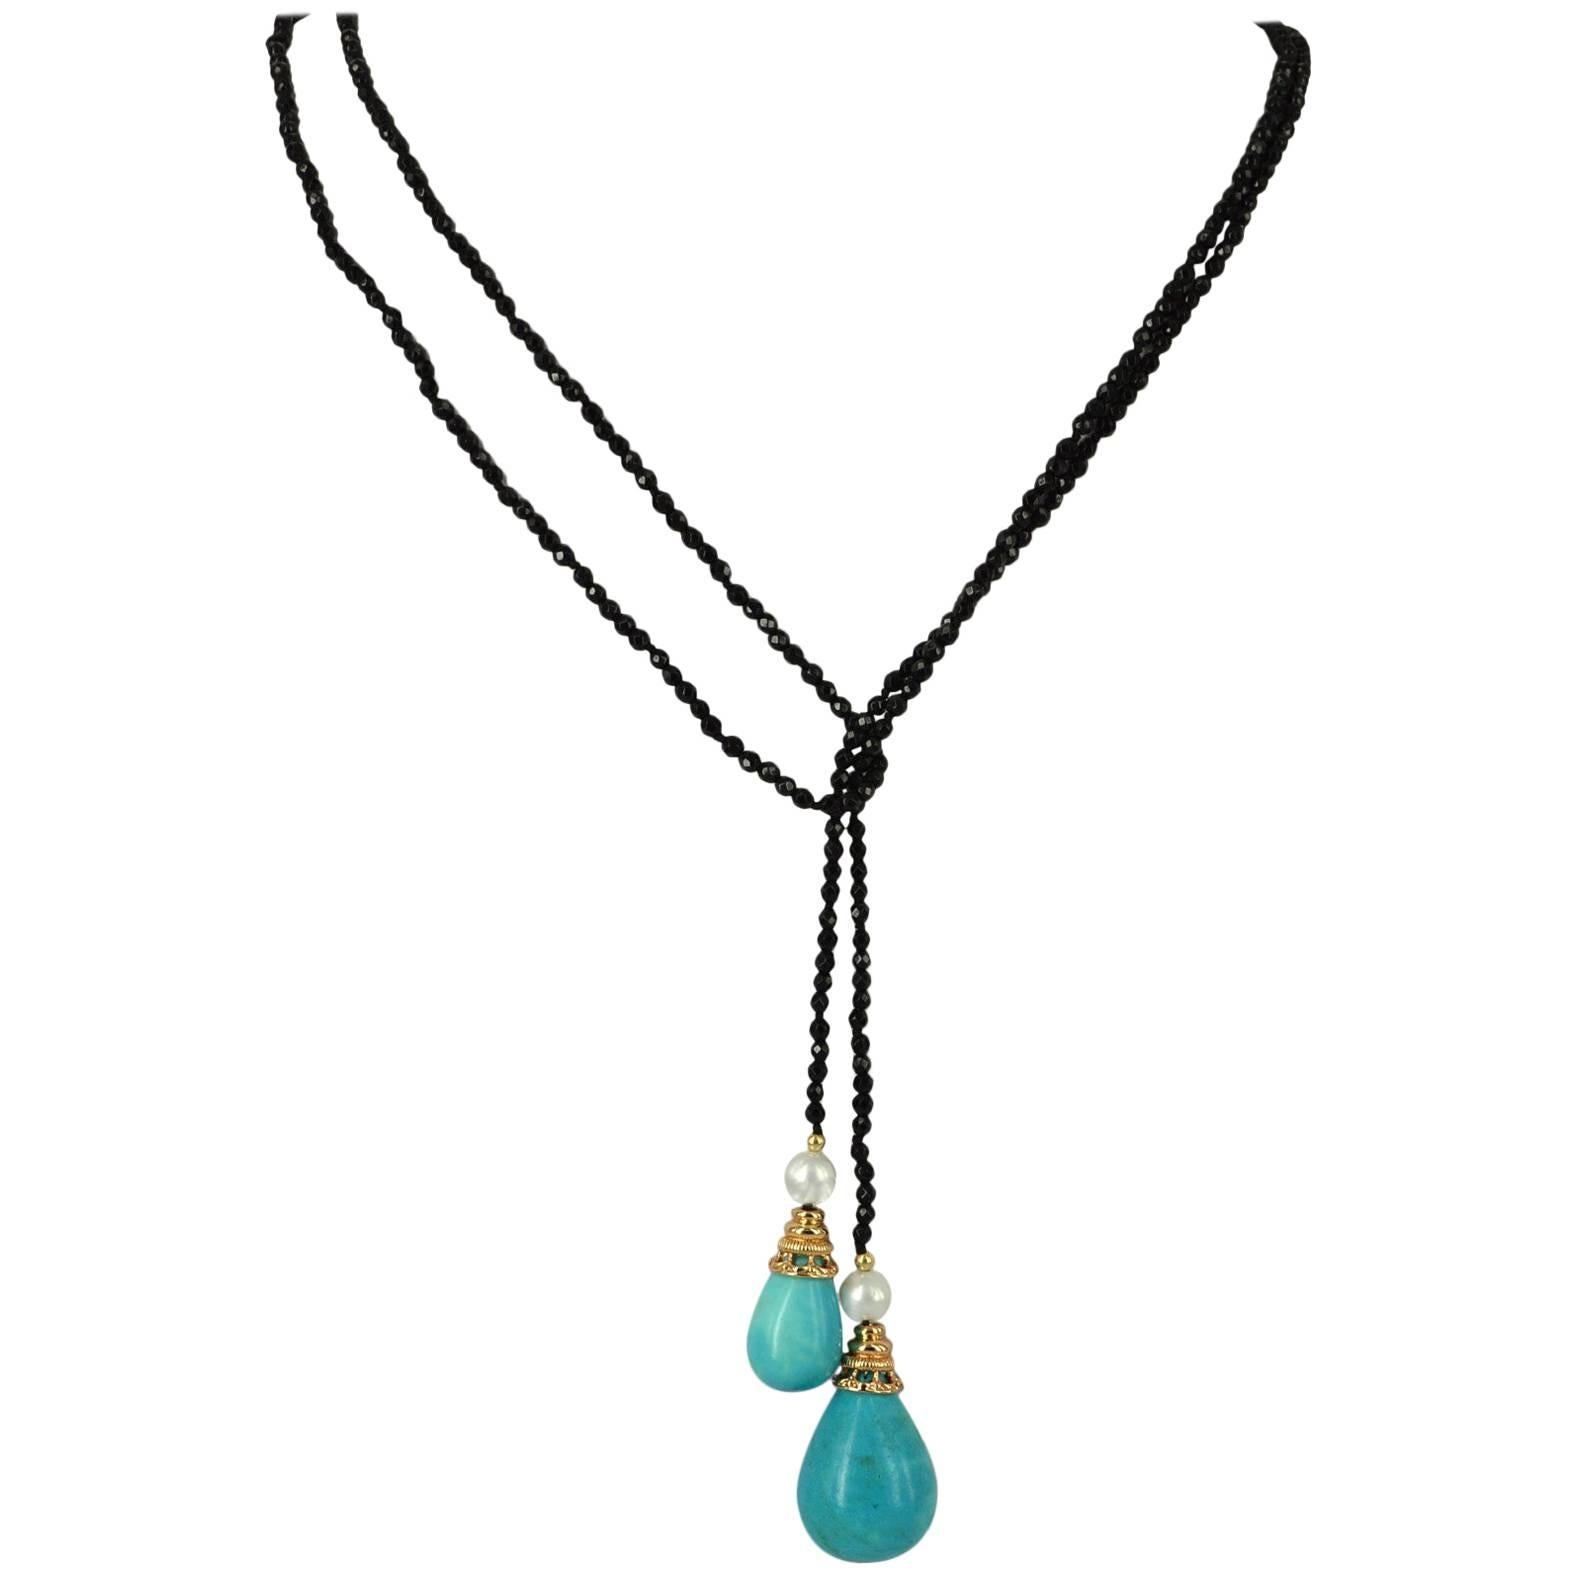 Decadent Jewels Turquoise Onyx Pearl Gold Lariet Necklace